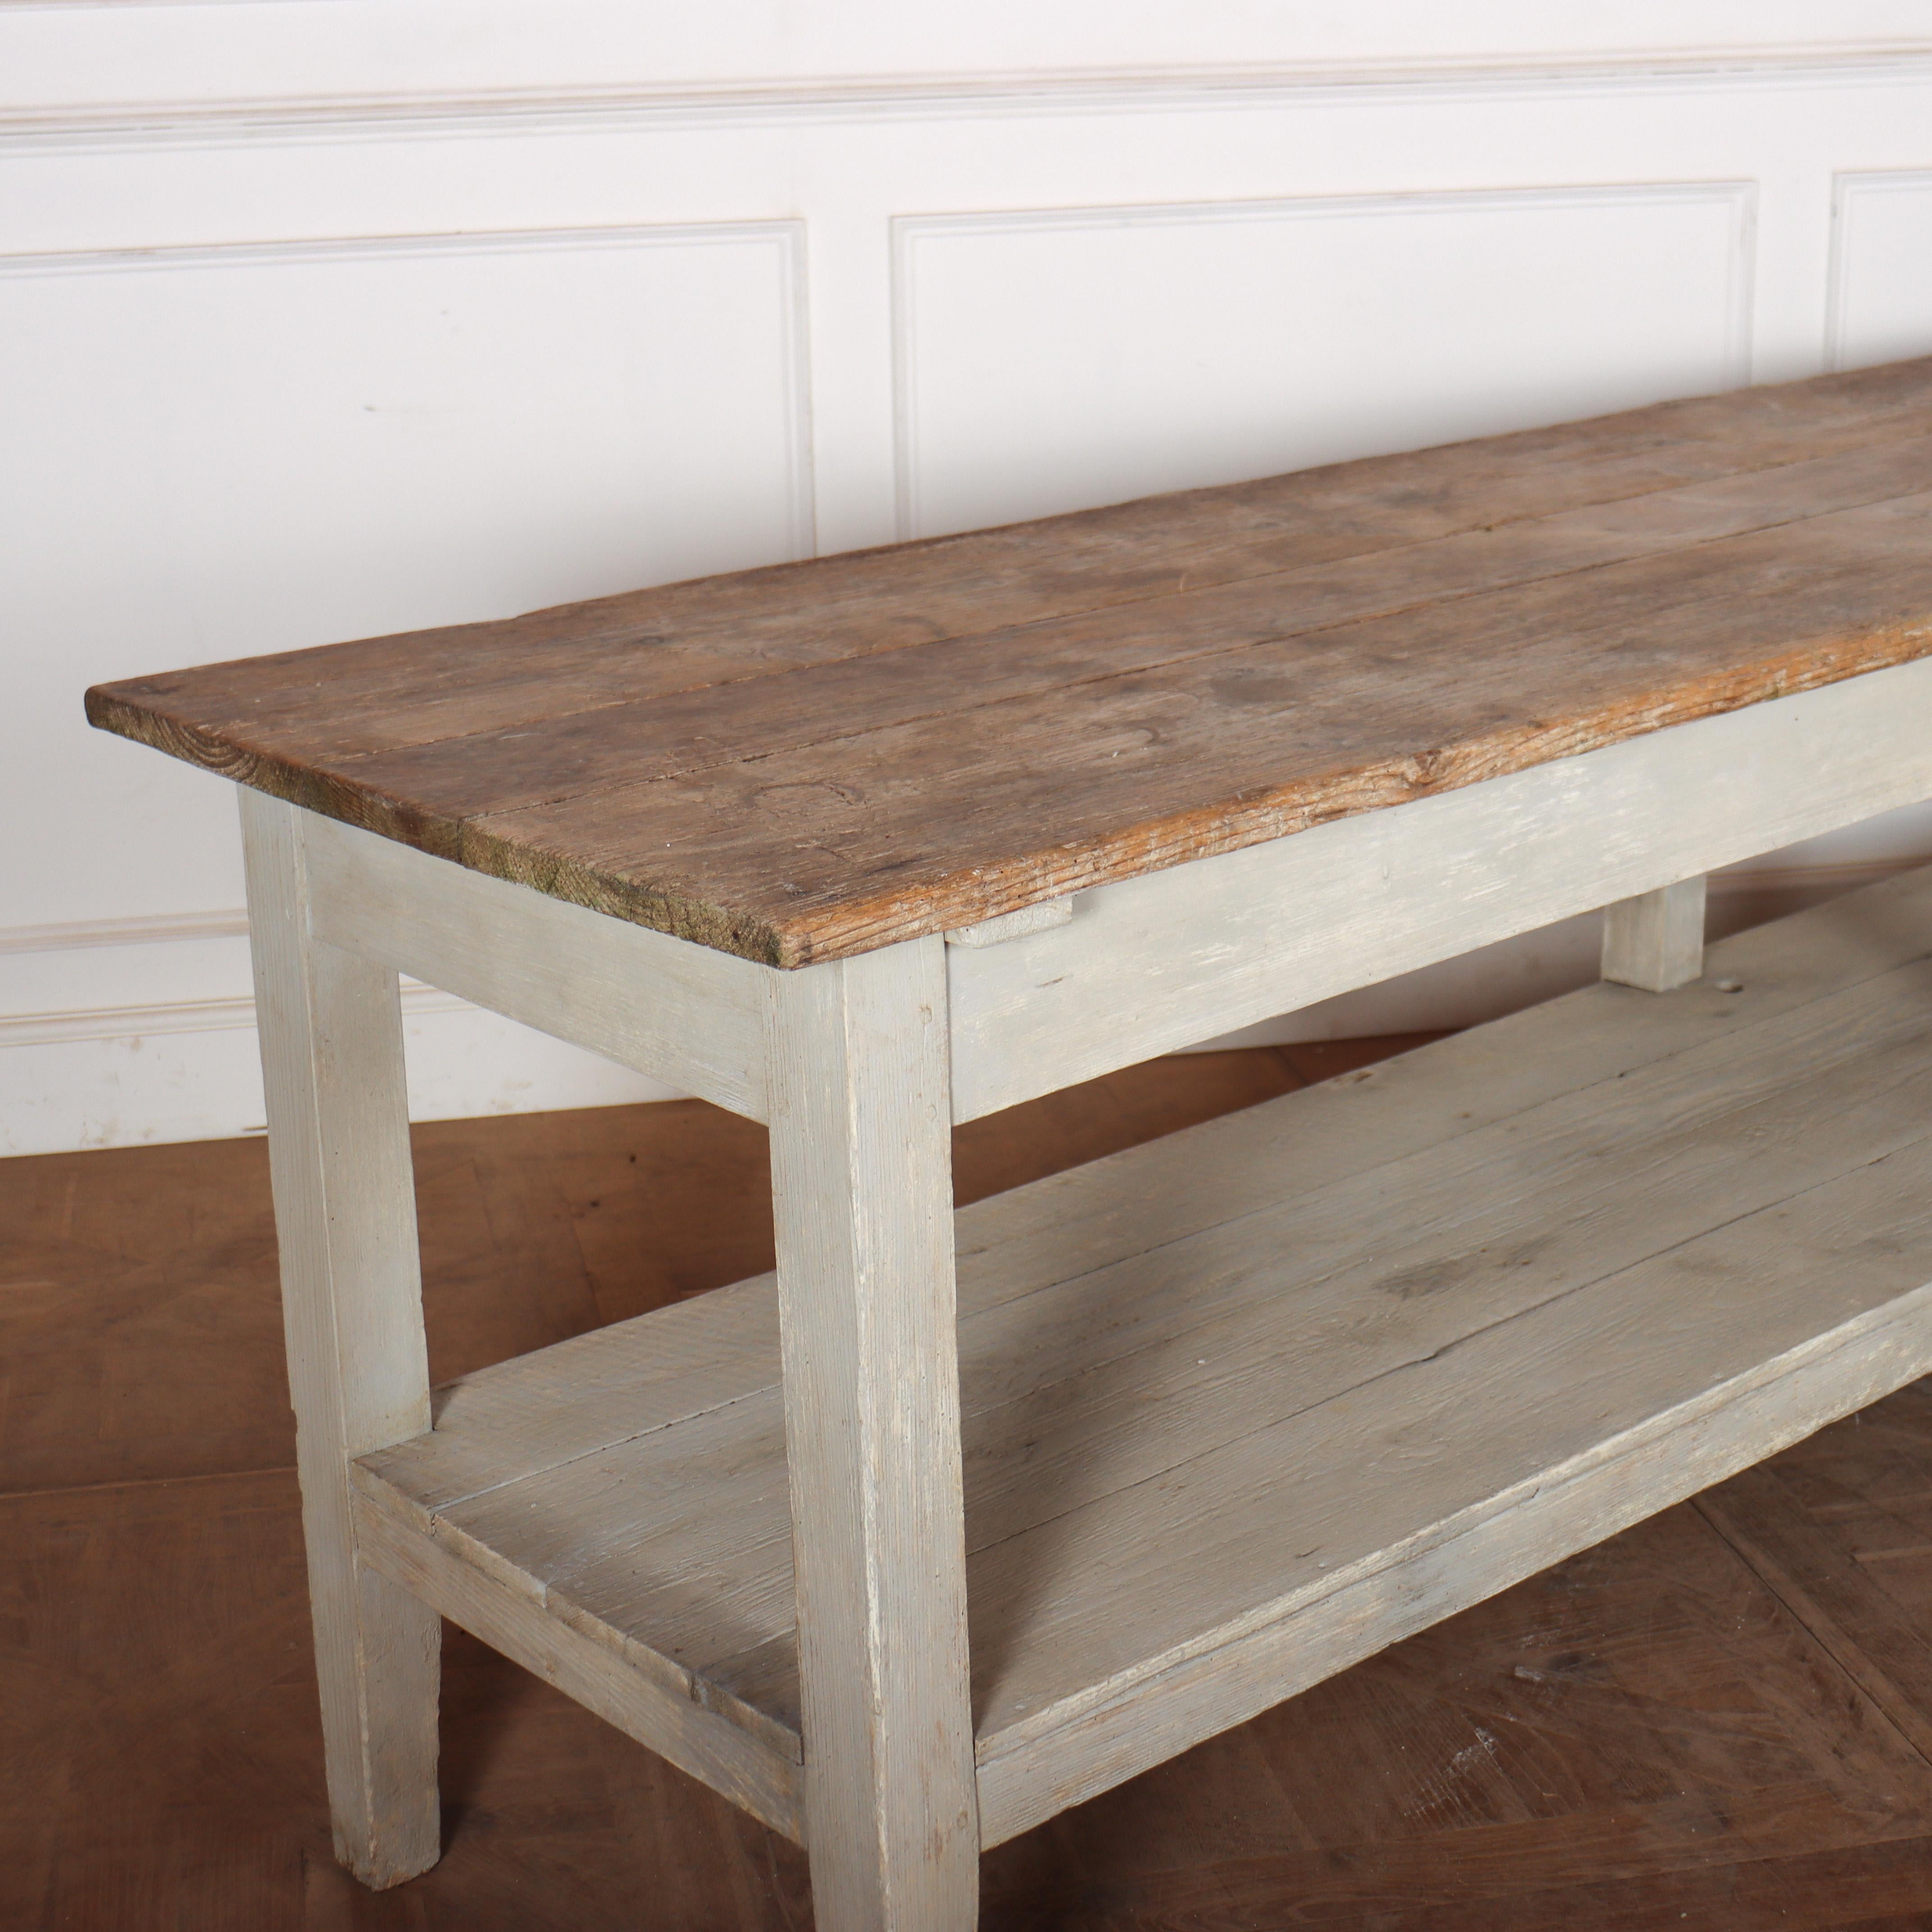 Large 19th C country house prep table / drapers table. Good scrubbed pine top. 1880.

Height from shelf to apron is 15